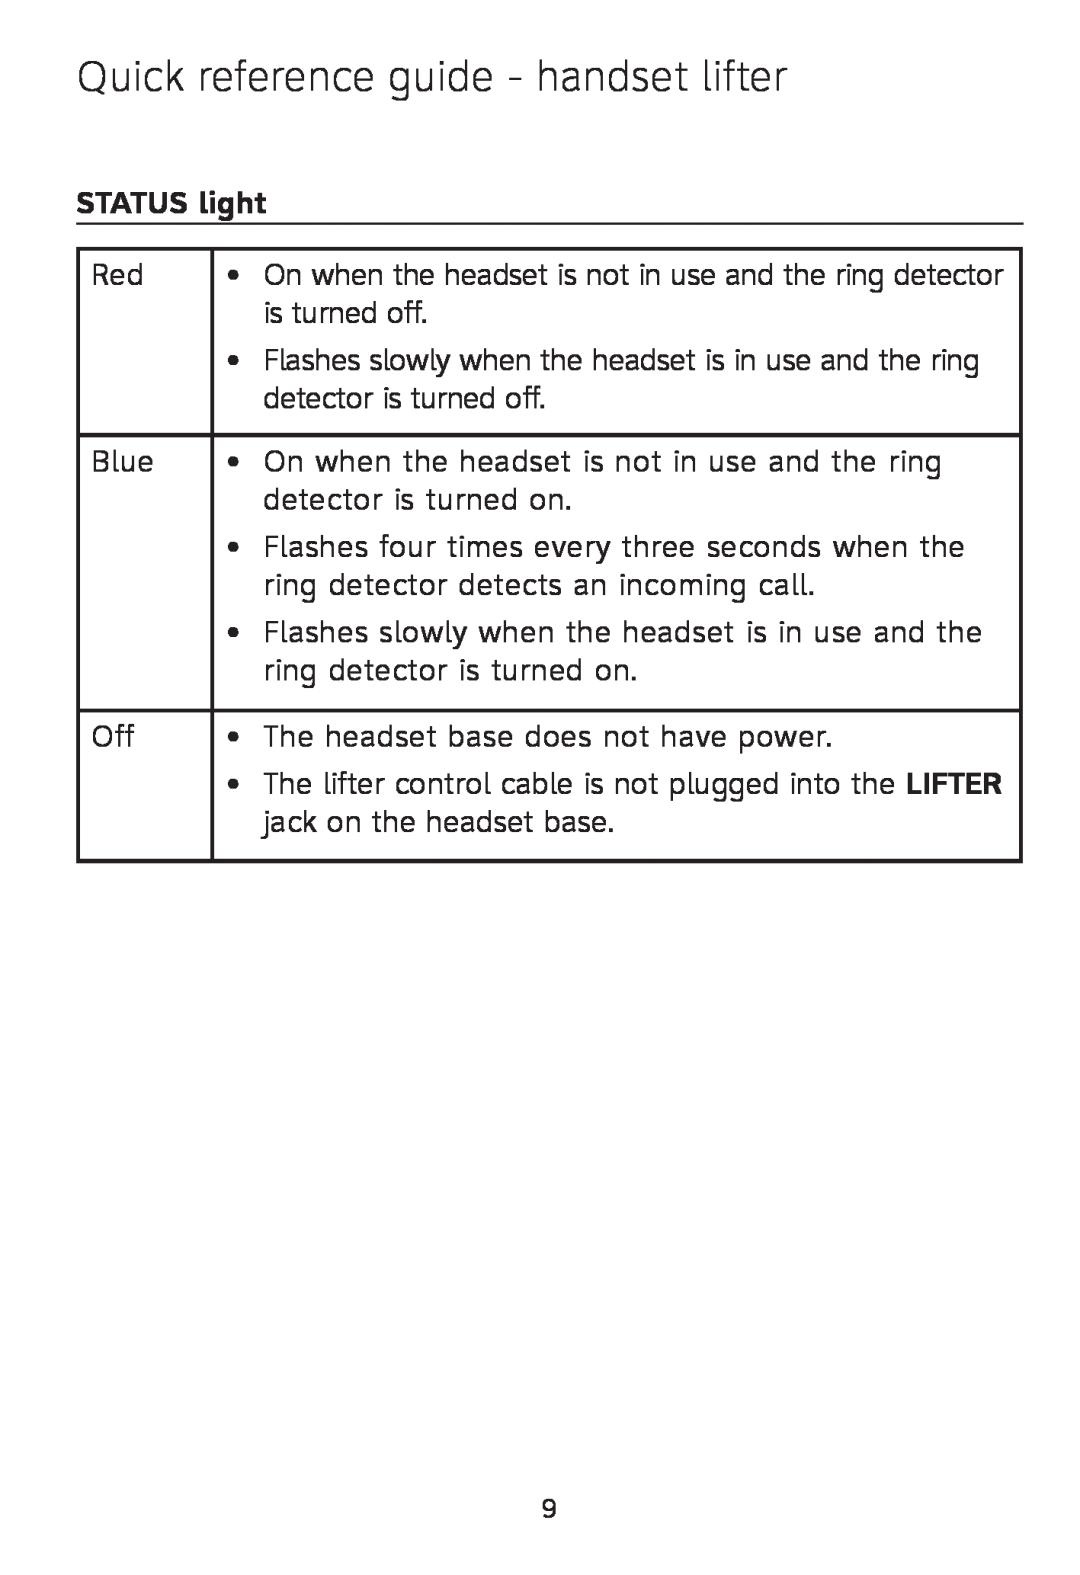 AT&T TL7612 quick start STATUS light, Quick reference guide - handset lifter 